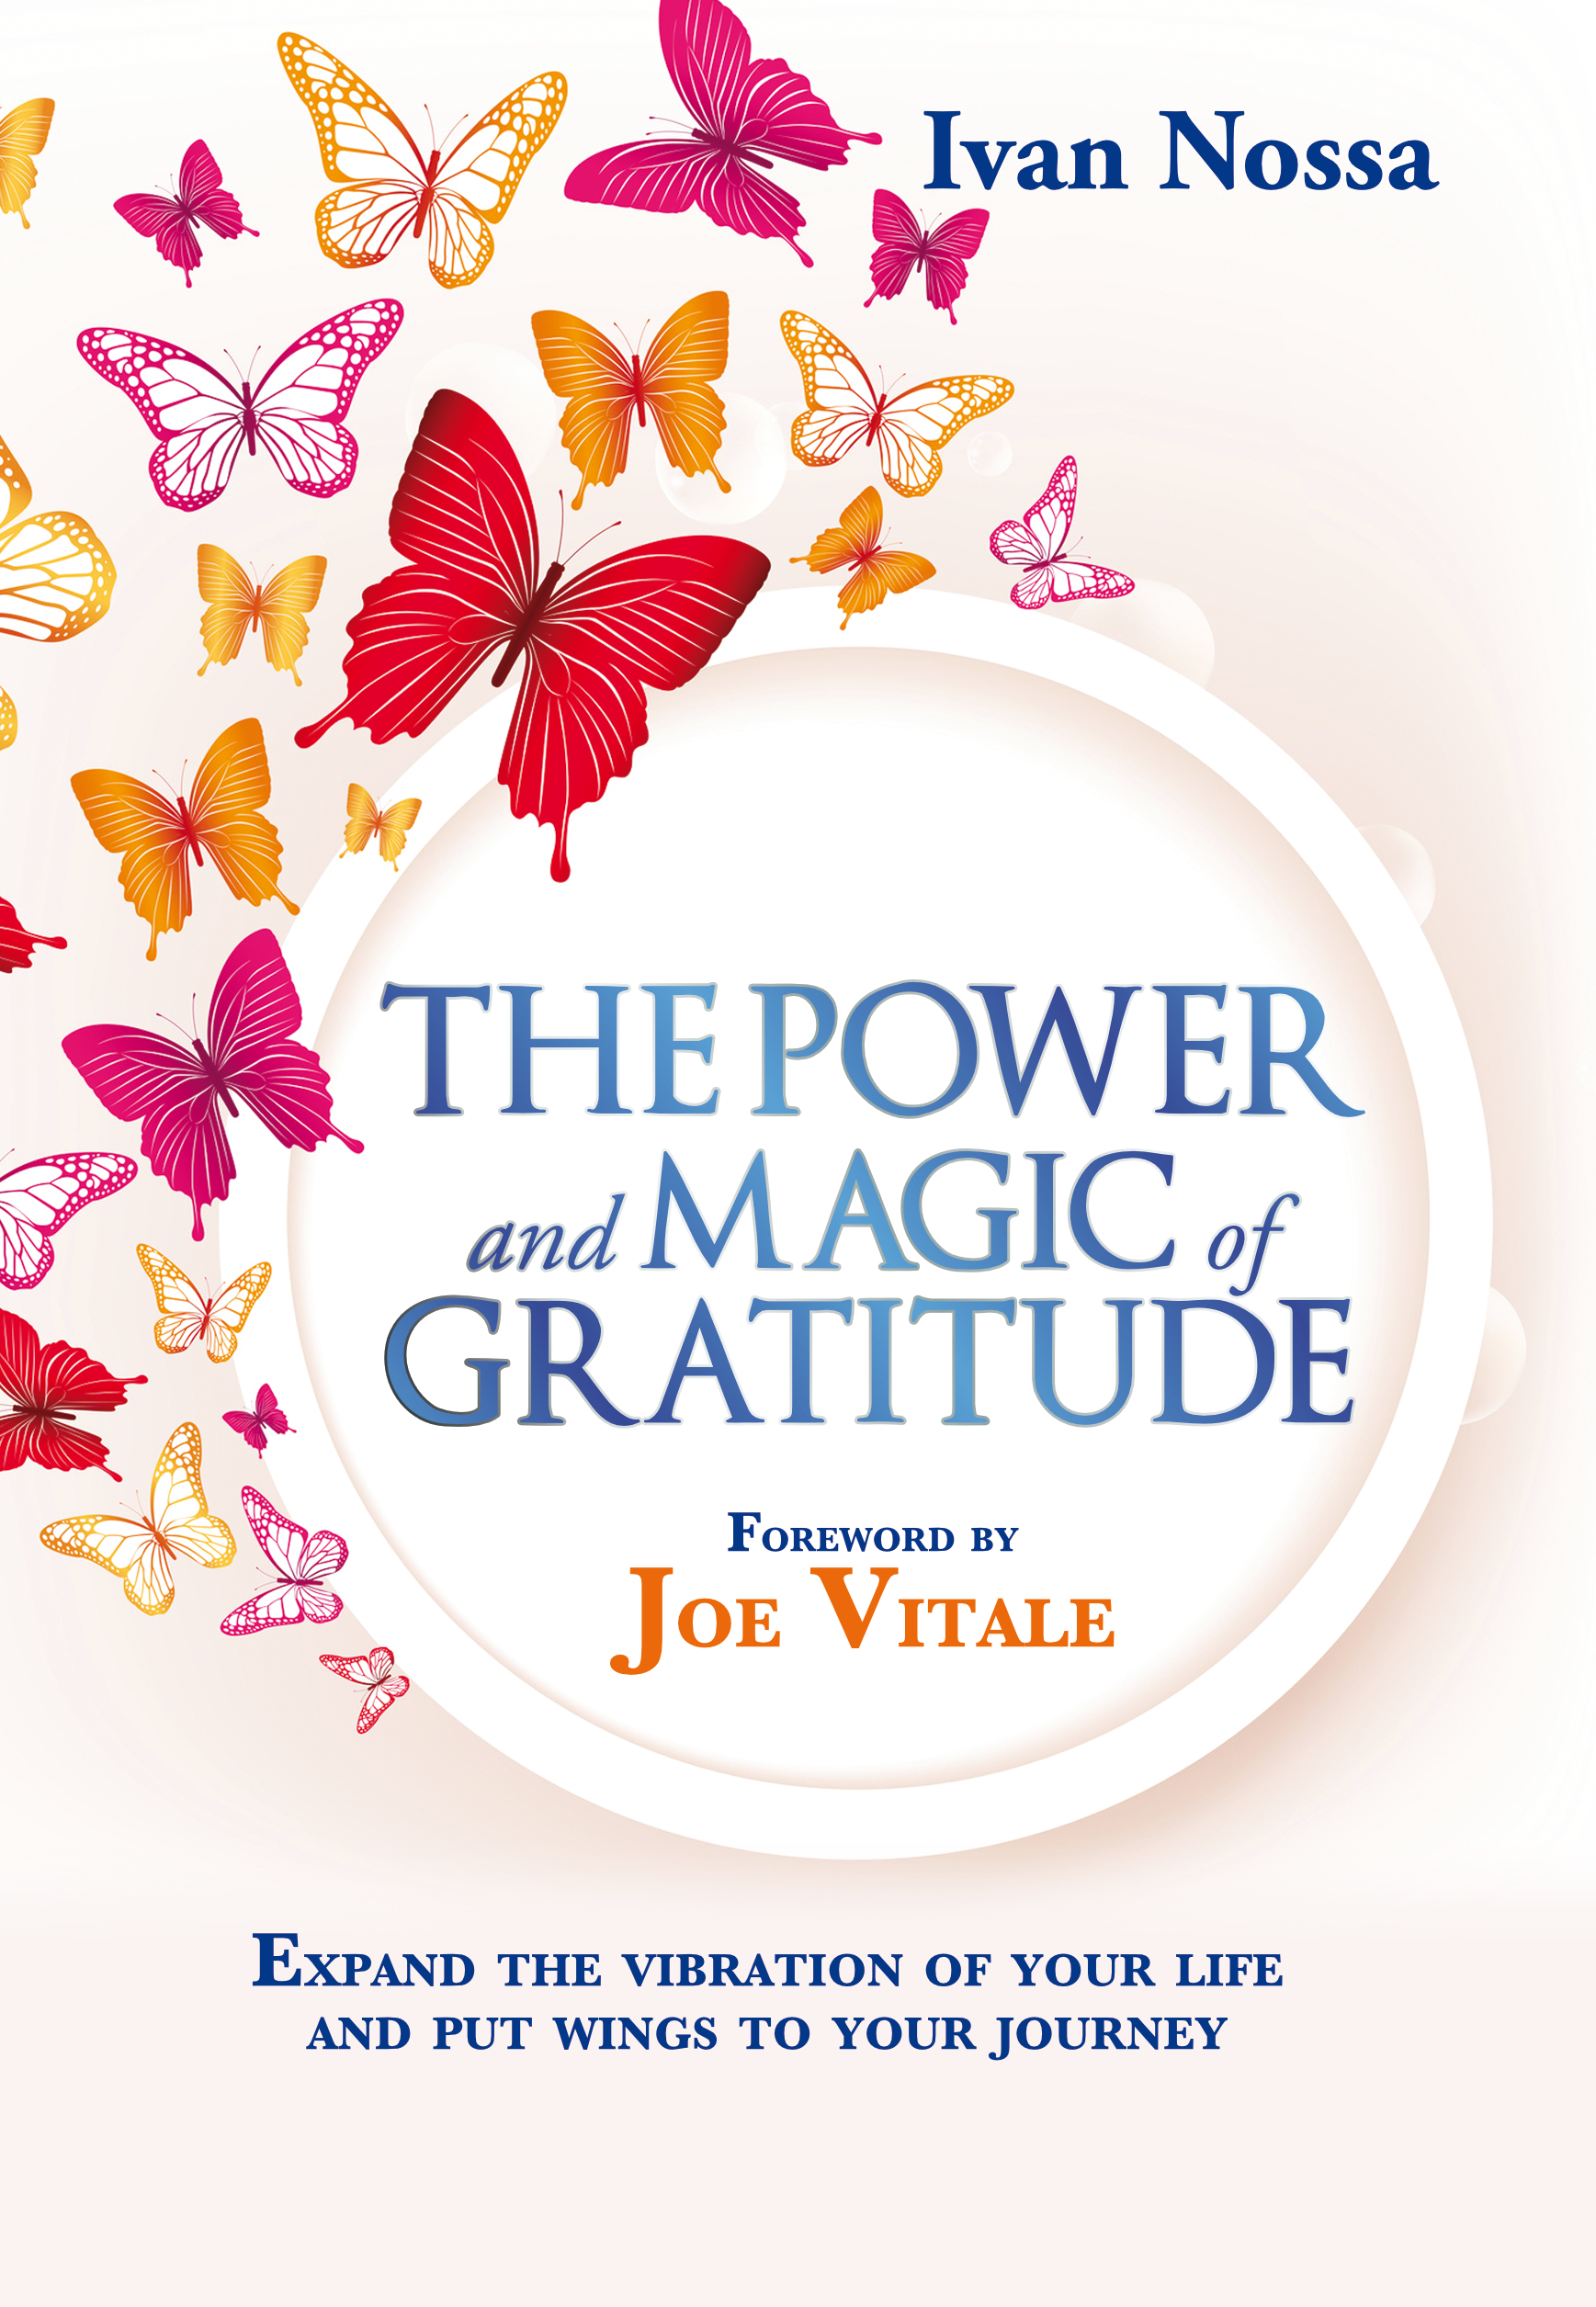 FREE: The Power and Magic of Gratitude by Ivan Nossa